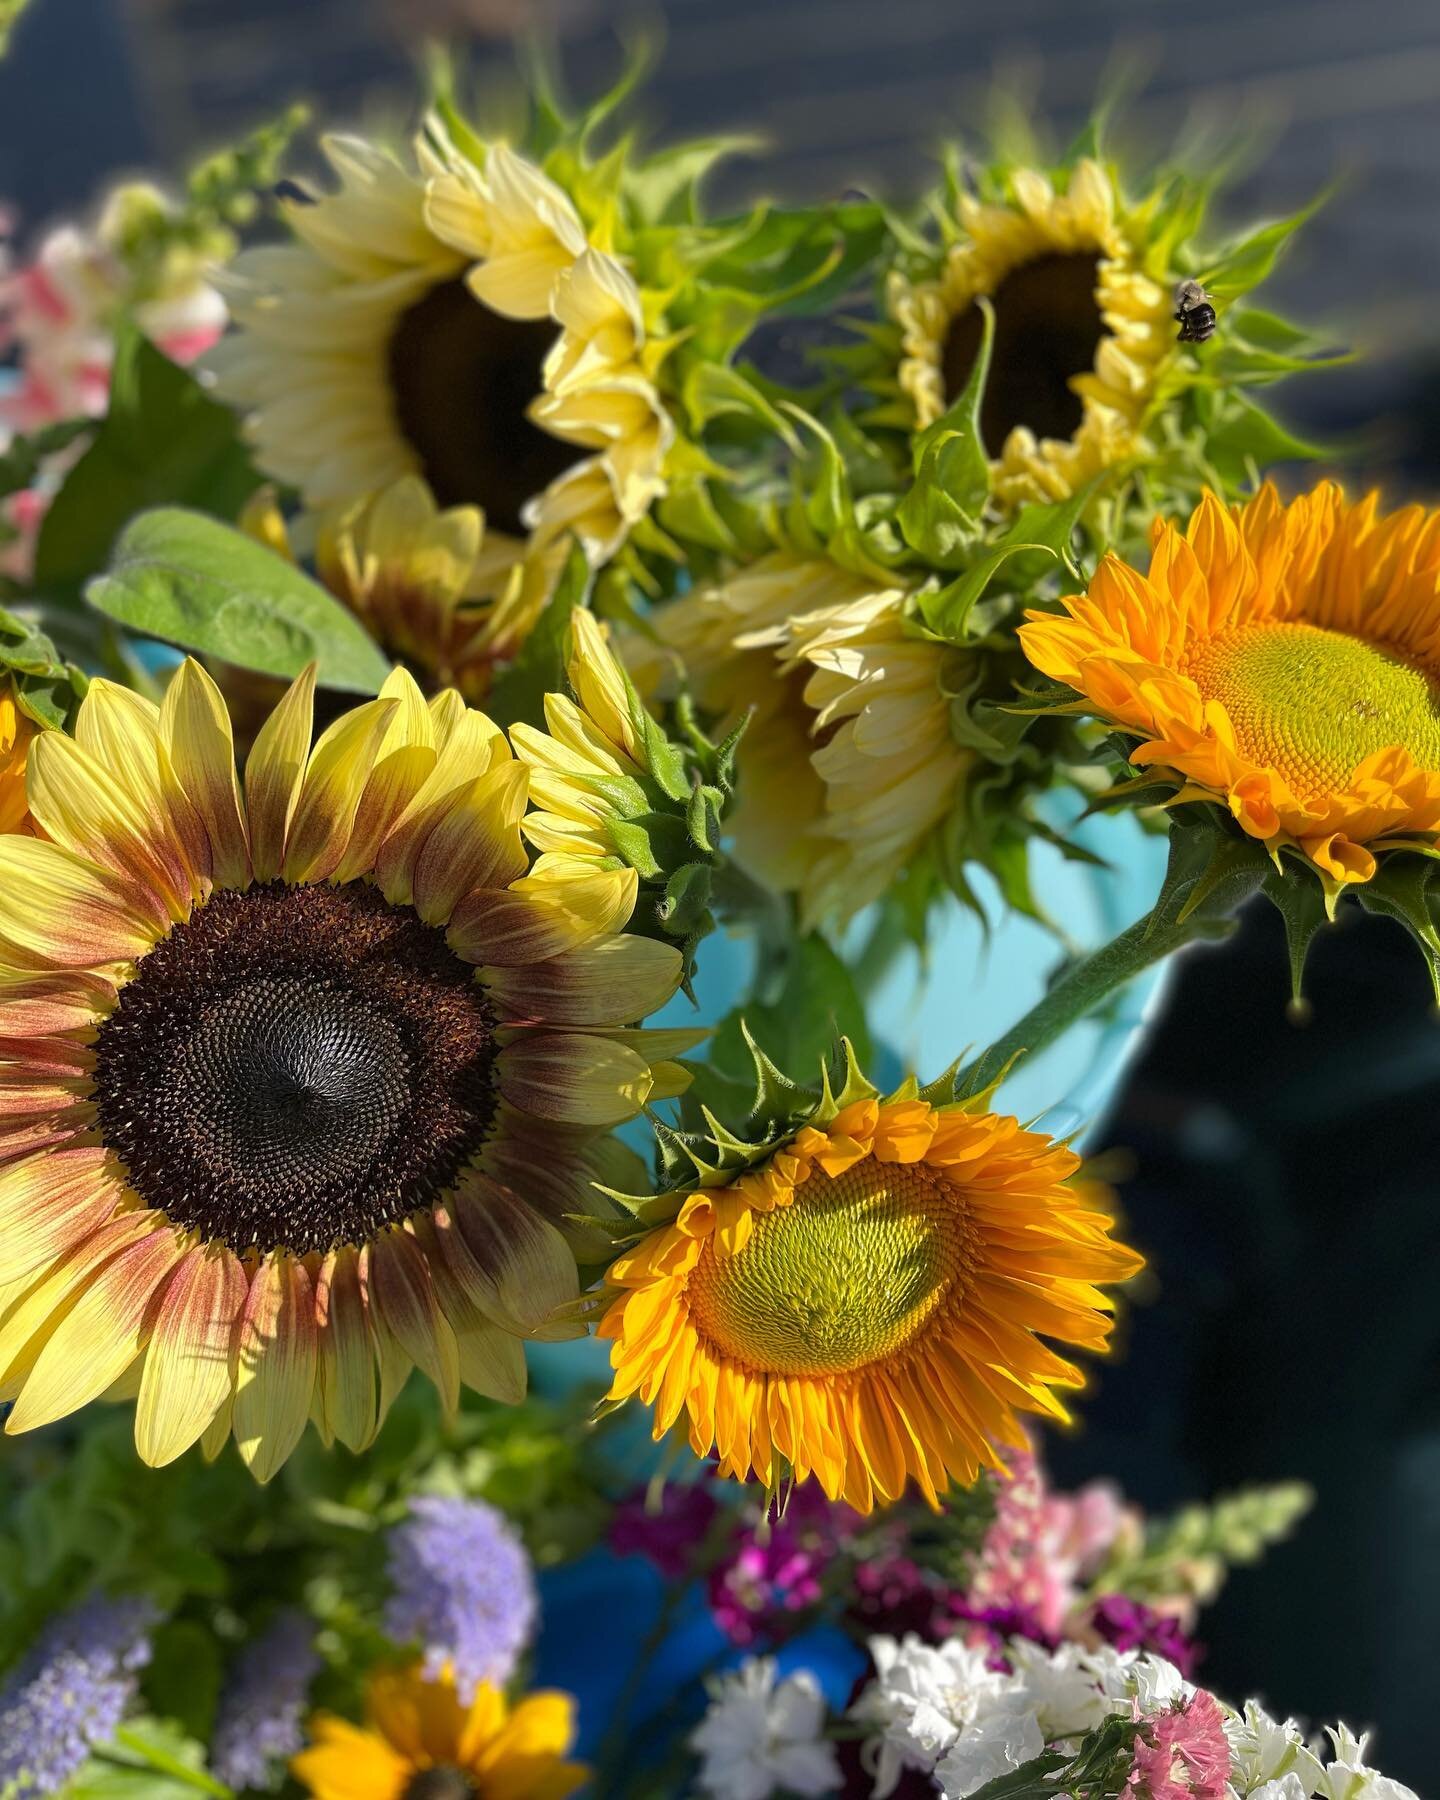 Hope to see you at Interlochen farmers market from 9 to 2, will have fresh cut blooms for you to build a bouquet or just take one home.  #farmersmarket #blossomvalleyfruitsandflowers #sundayfunday #upnorth  #puremichigan #shopsmall #greatgifts #flowe